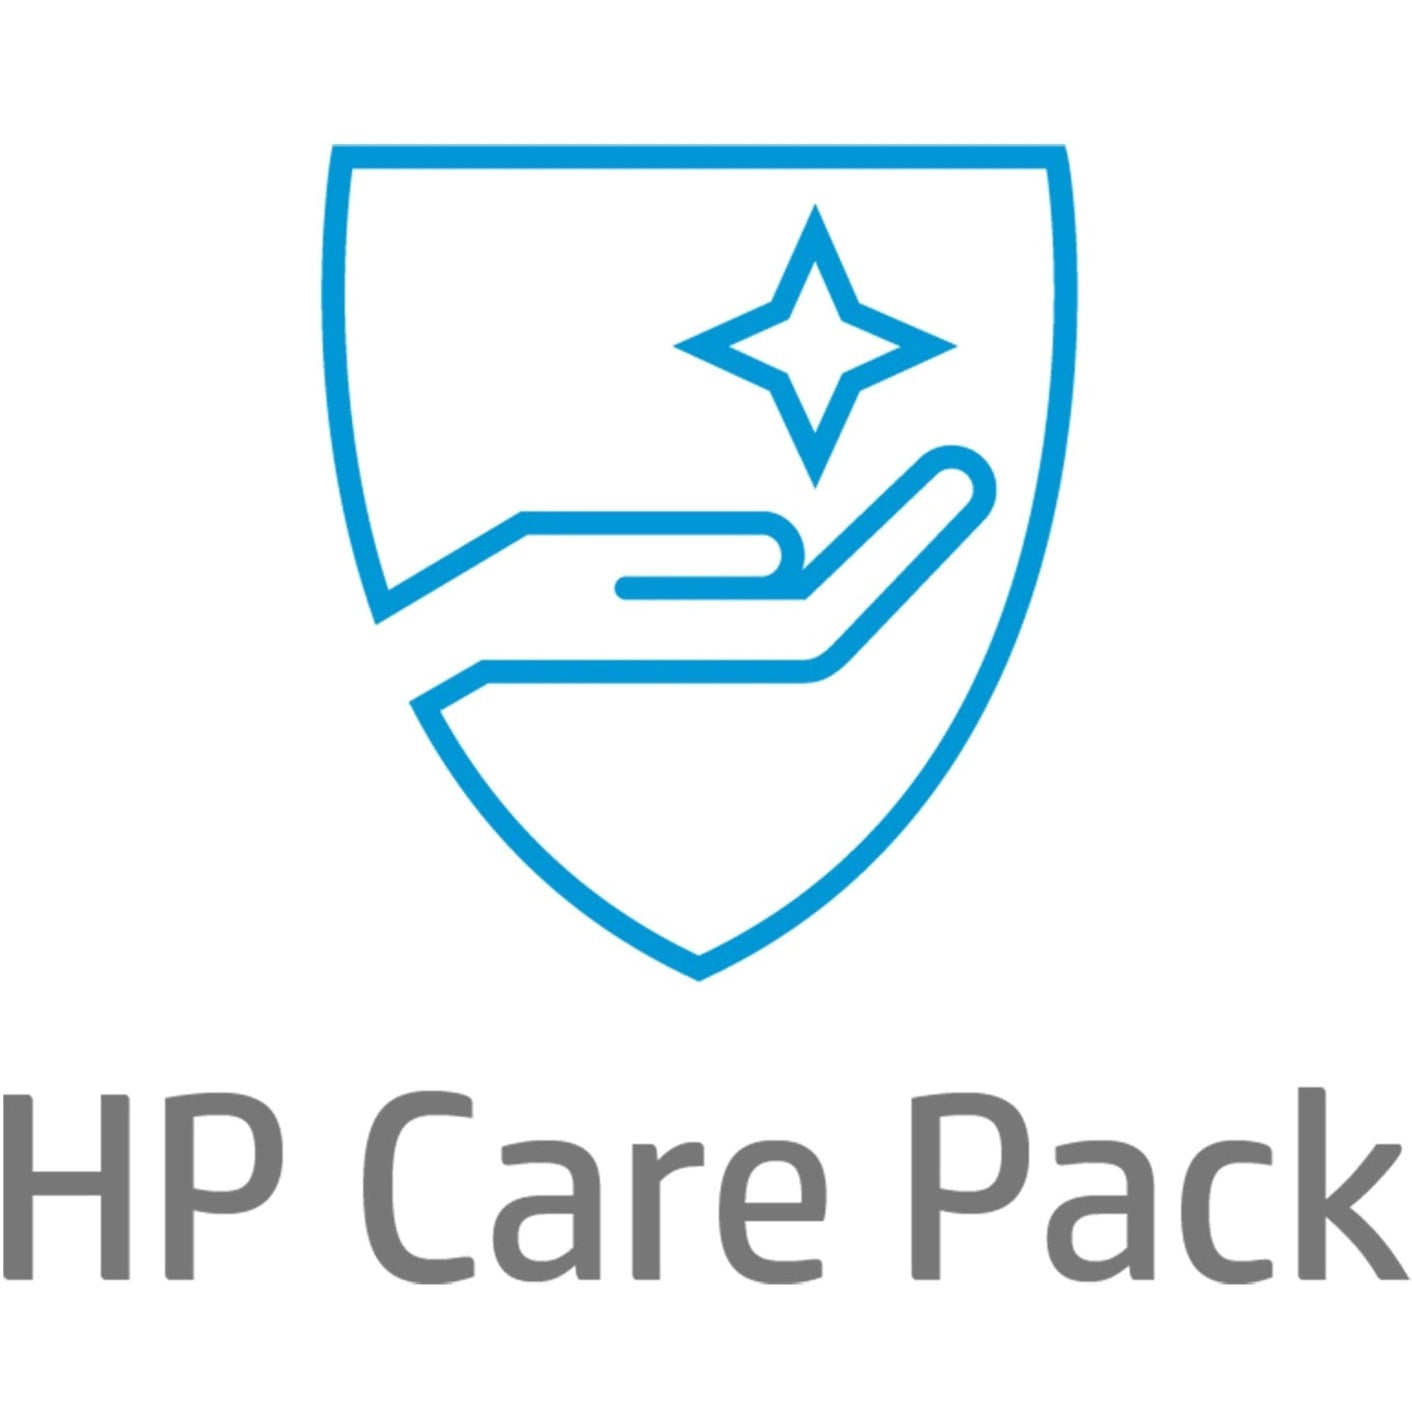 HP Care Pack - Extended Warranty - 4 Year - Warranty (U9DQ7E)